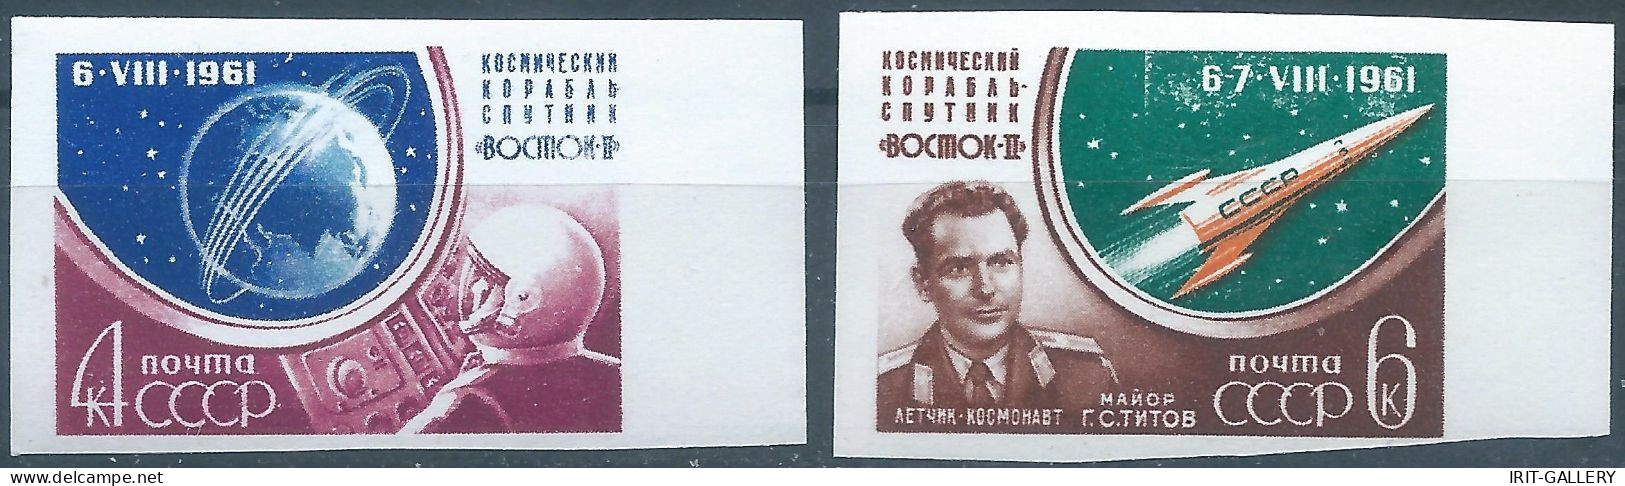 Russia-Union Of Soviet-CCCP,1961 The Second Manned Space Flight,IMPERF,Mint - Rusland En USSR